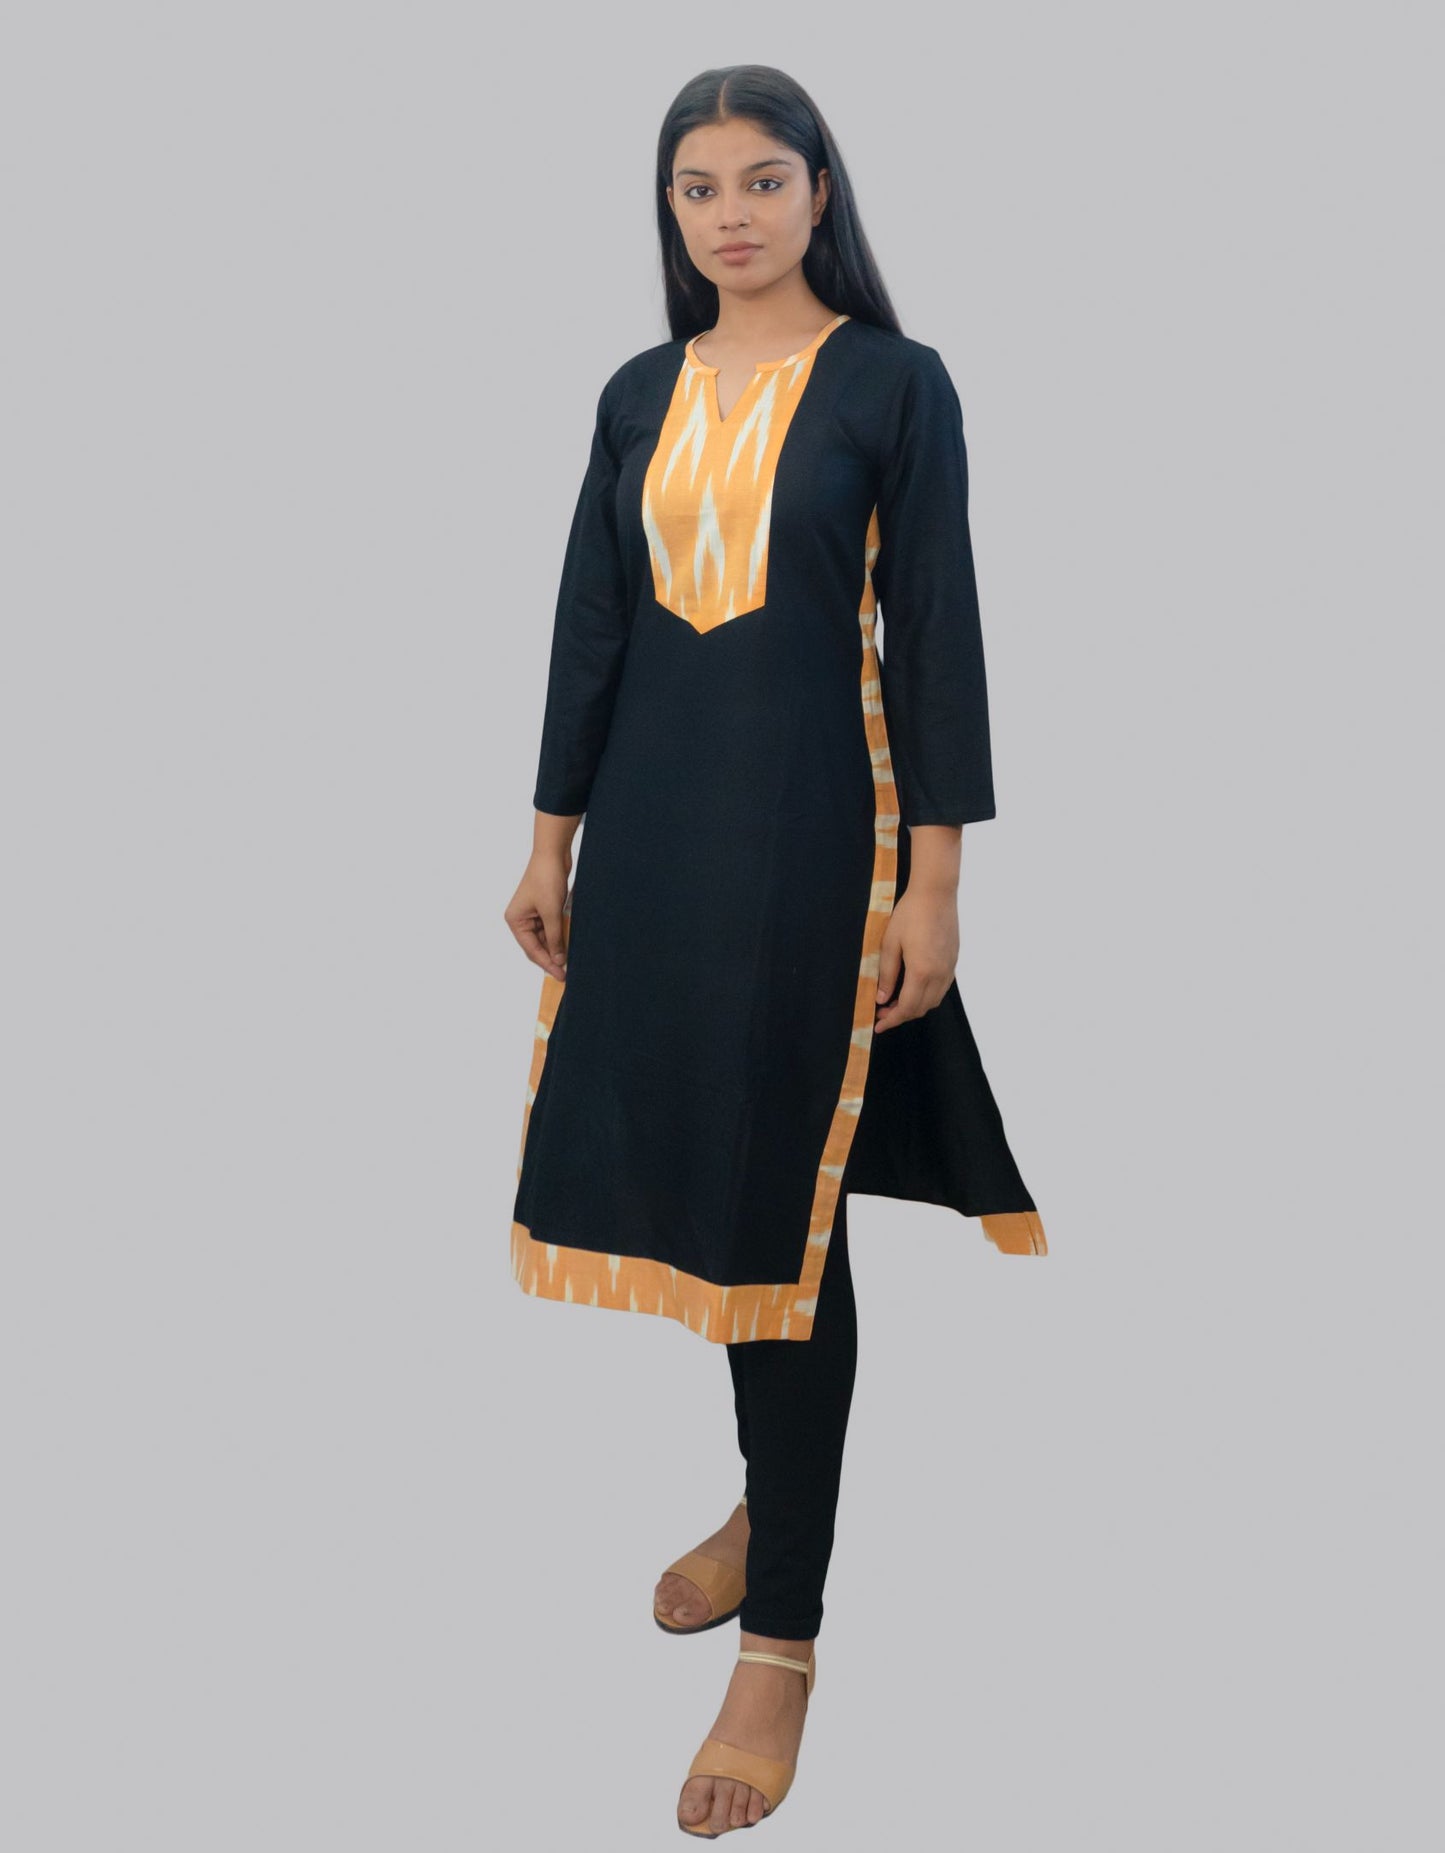 The Formal Black Kurti with Ikat Patch Detailing"